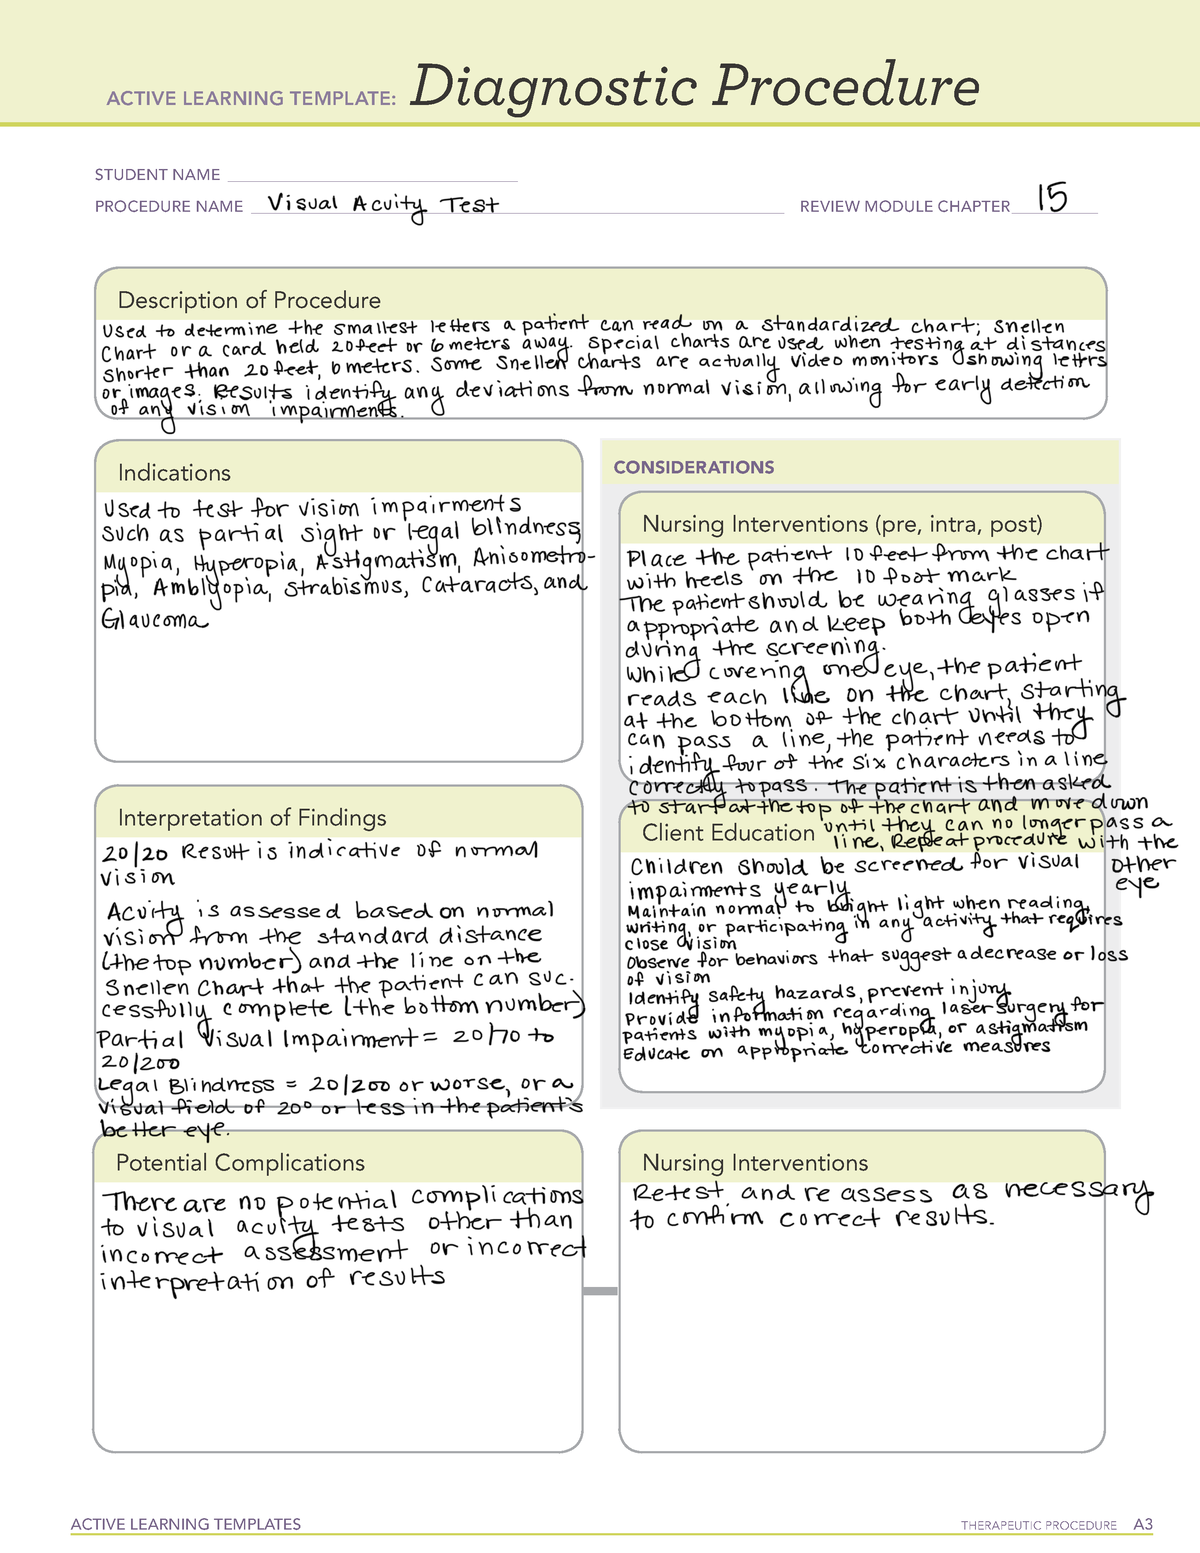 Visual Acuity Testing - ATI Remediation Template - ACTIVE LEARNING ...